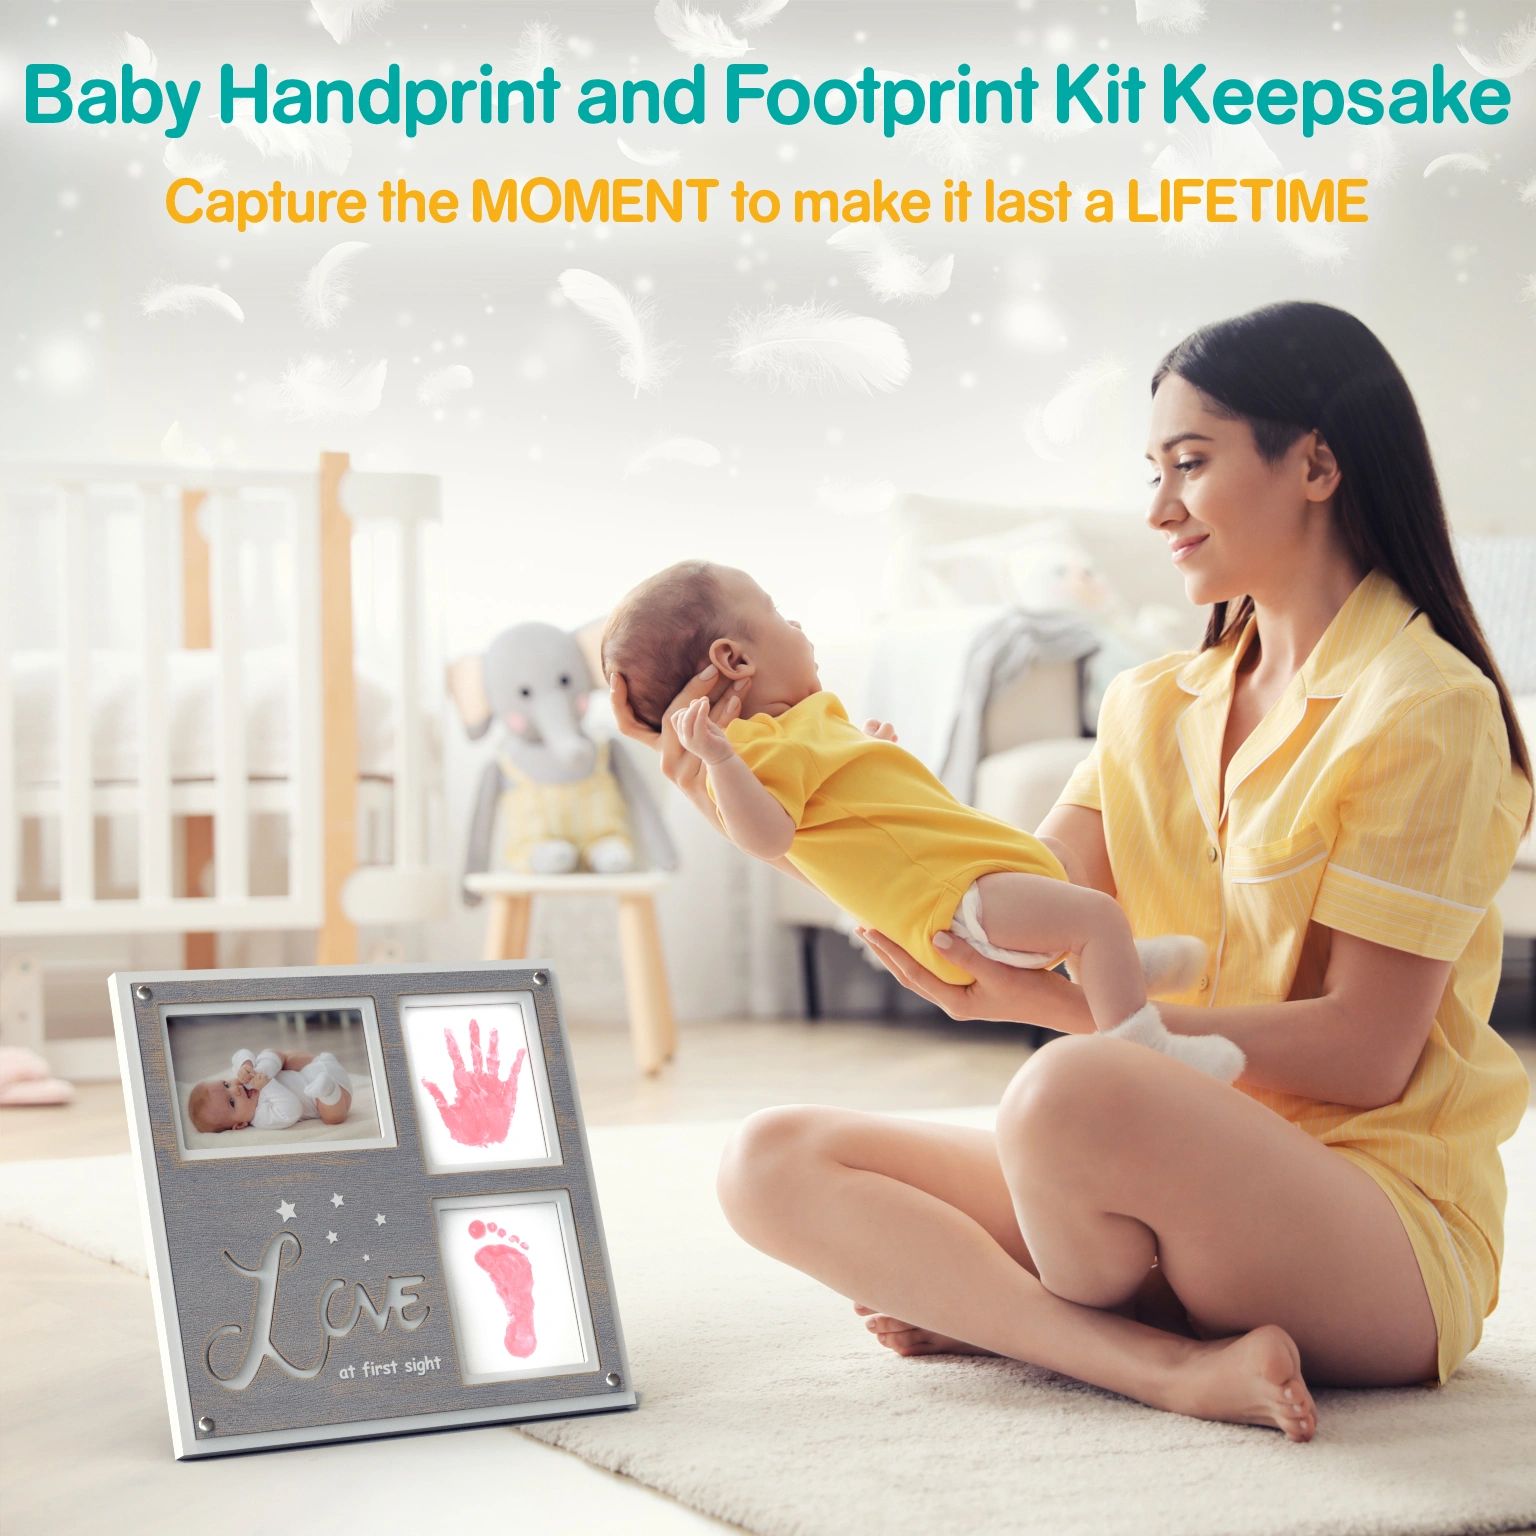 Family Handprint Kit - DIY Handmade Keepsake Wooden Frame - Family Gifts -  Gift for New and Expecting Parents, Includes 5 Non-Toxic Paint Colors